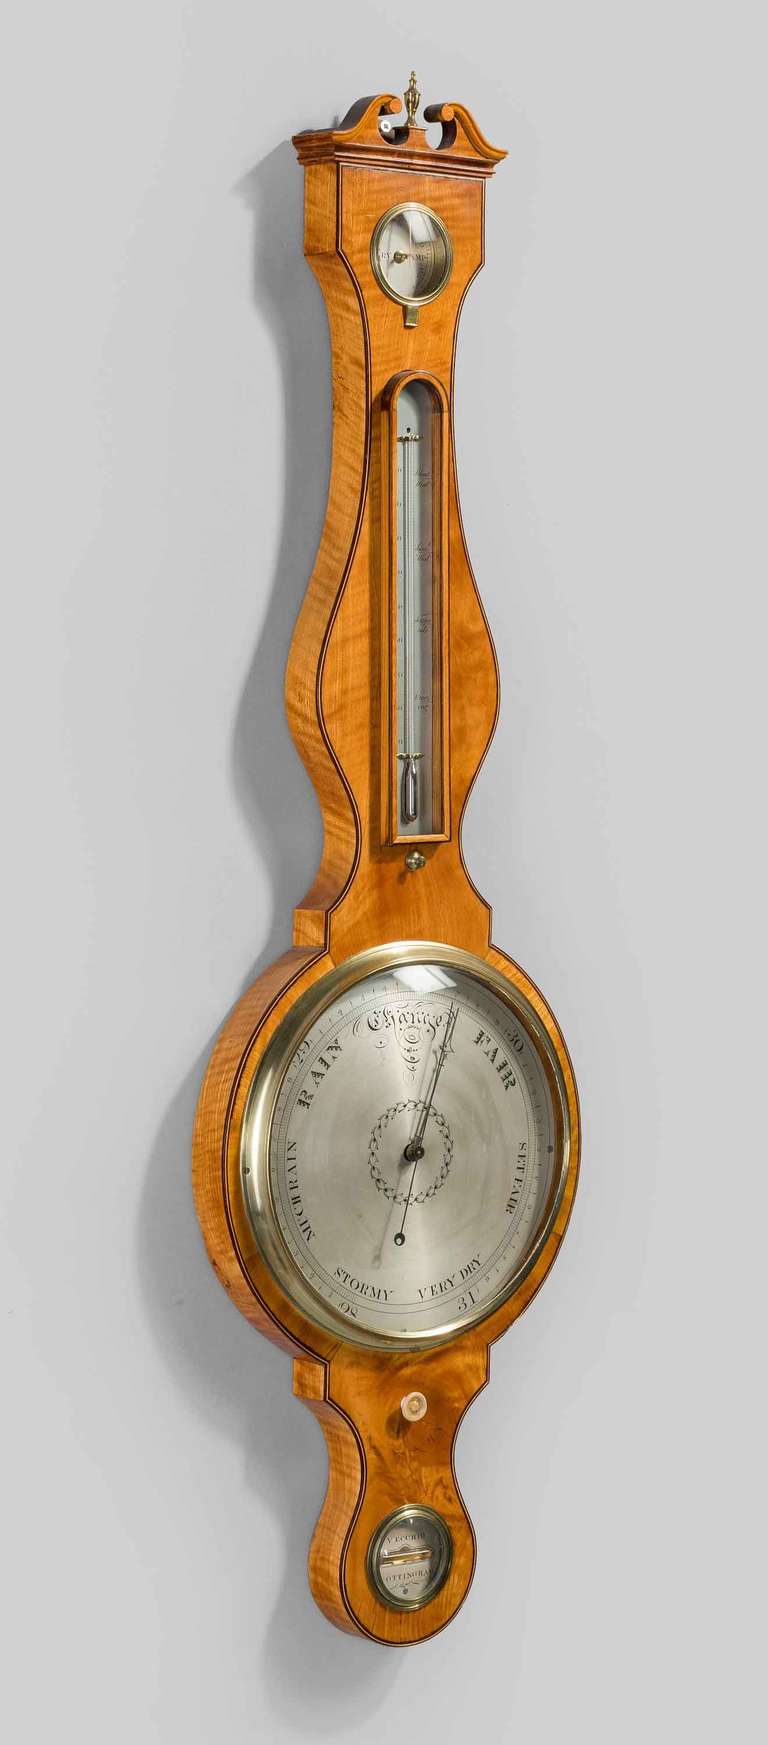 Fine quality and very attractive George III period 10 ins wheel barometer by Vecchio of Nottingham having silvered thermometer, hygrometer, spirit level and dial all in a satinwood case with a swan neck pediment with brass finial to top. Boxwood and